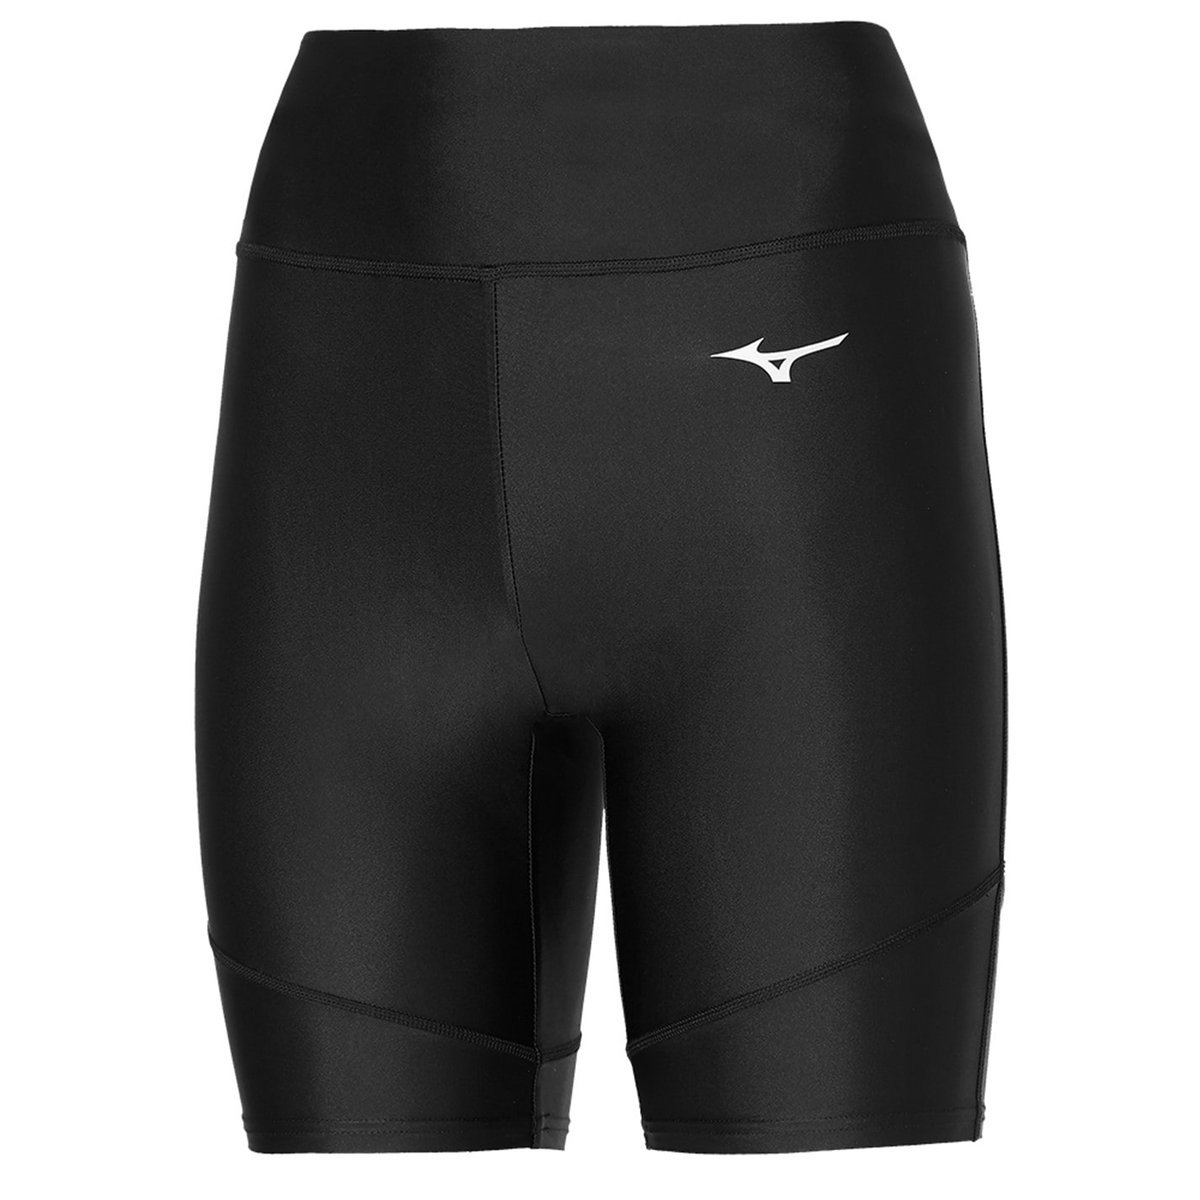 Mizuno Clothing & Accessories - Lovell Sports